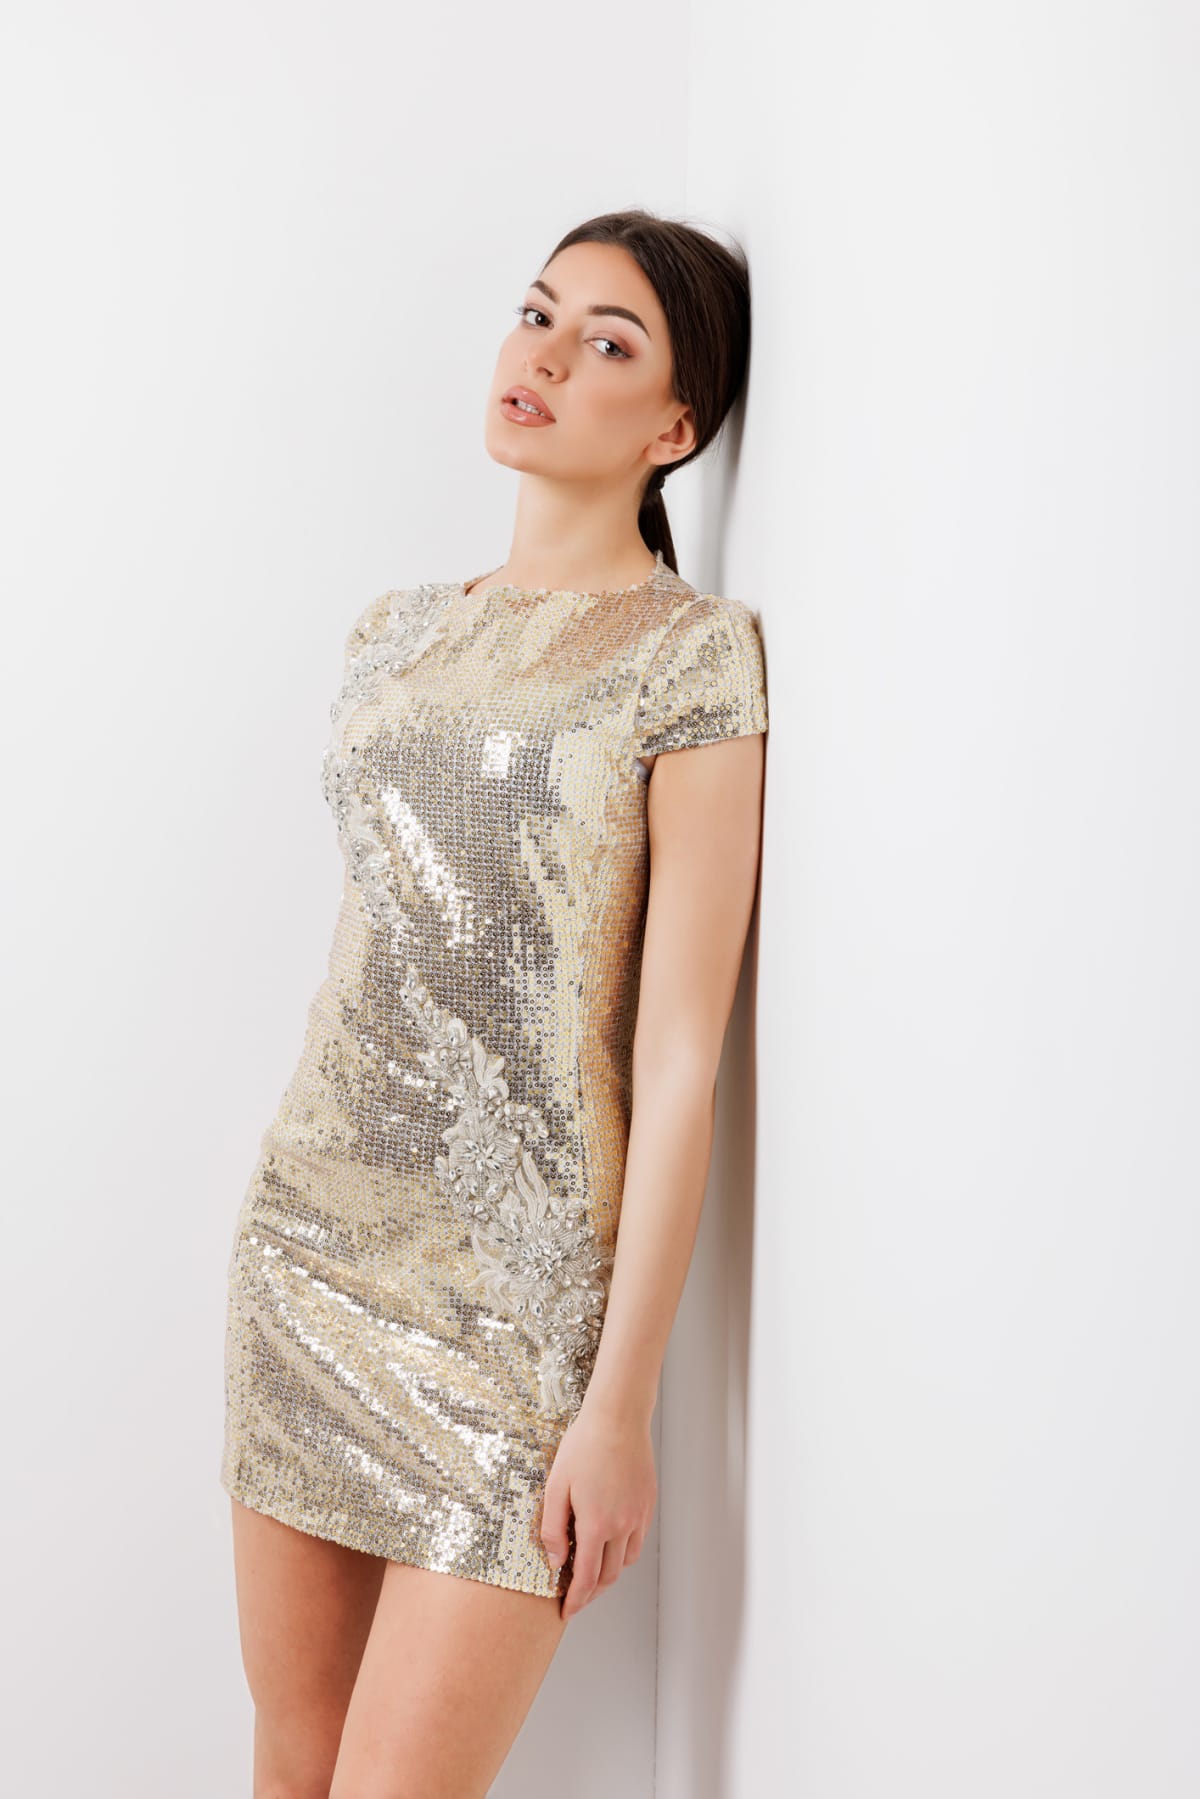 Woman in a champagne-colored sparkly dress leaning against a wall